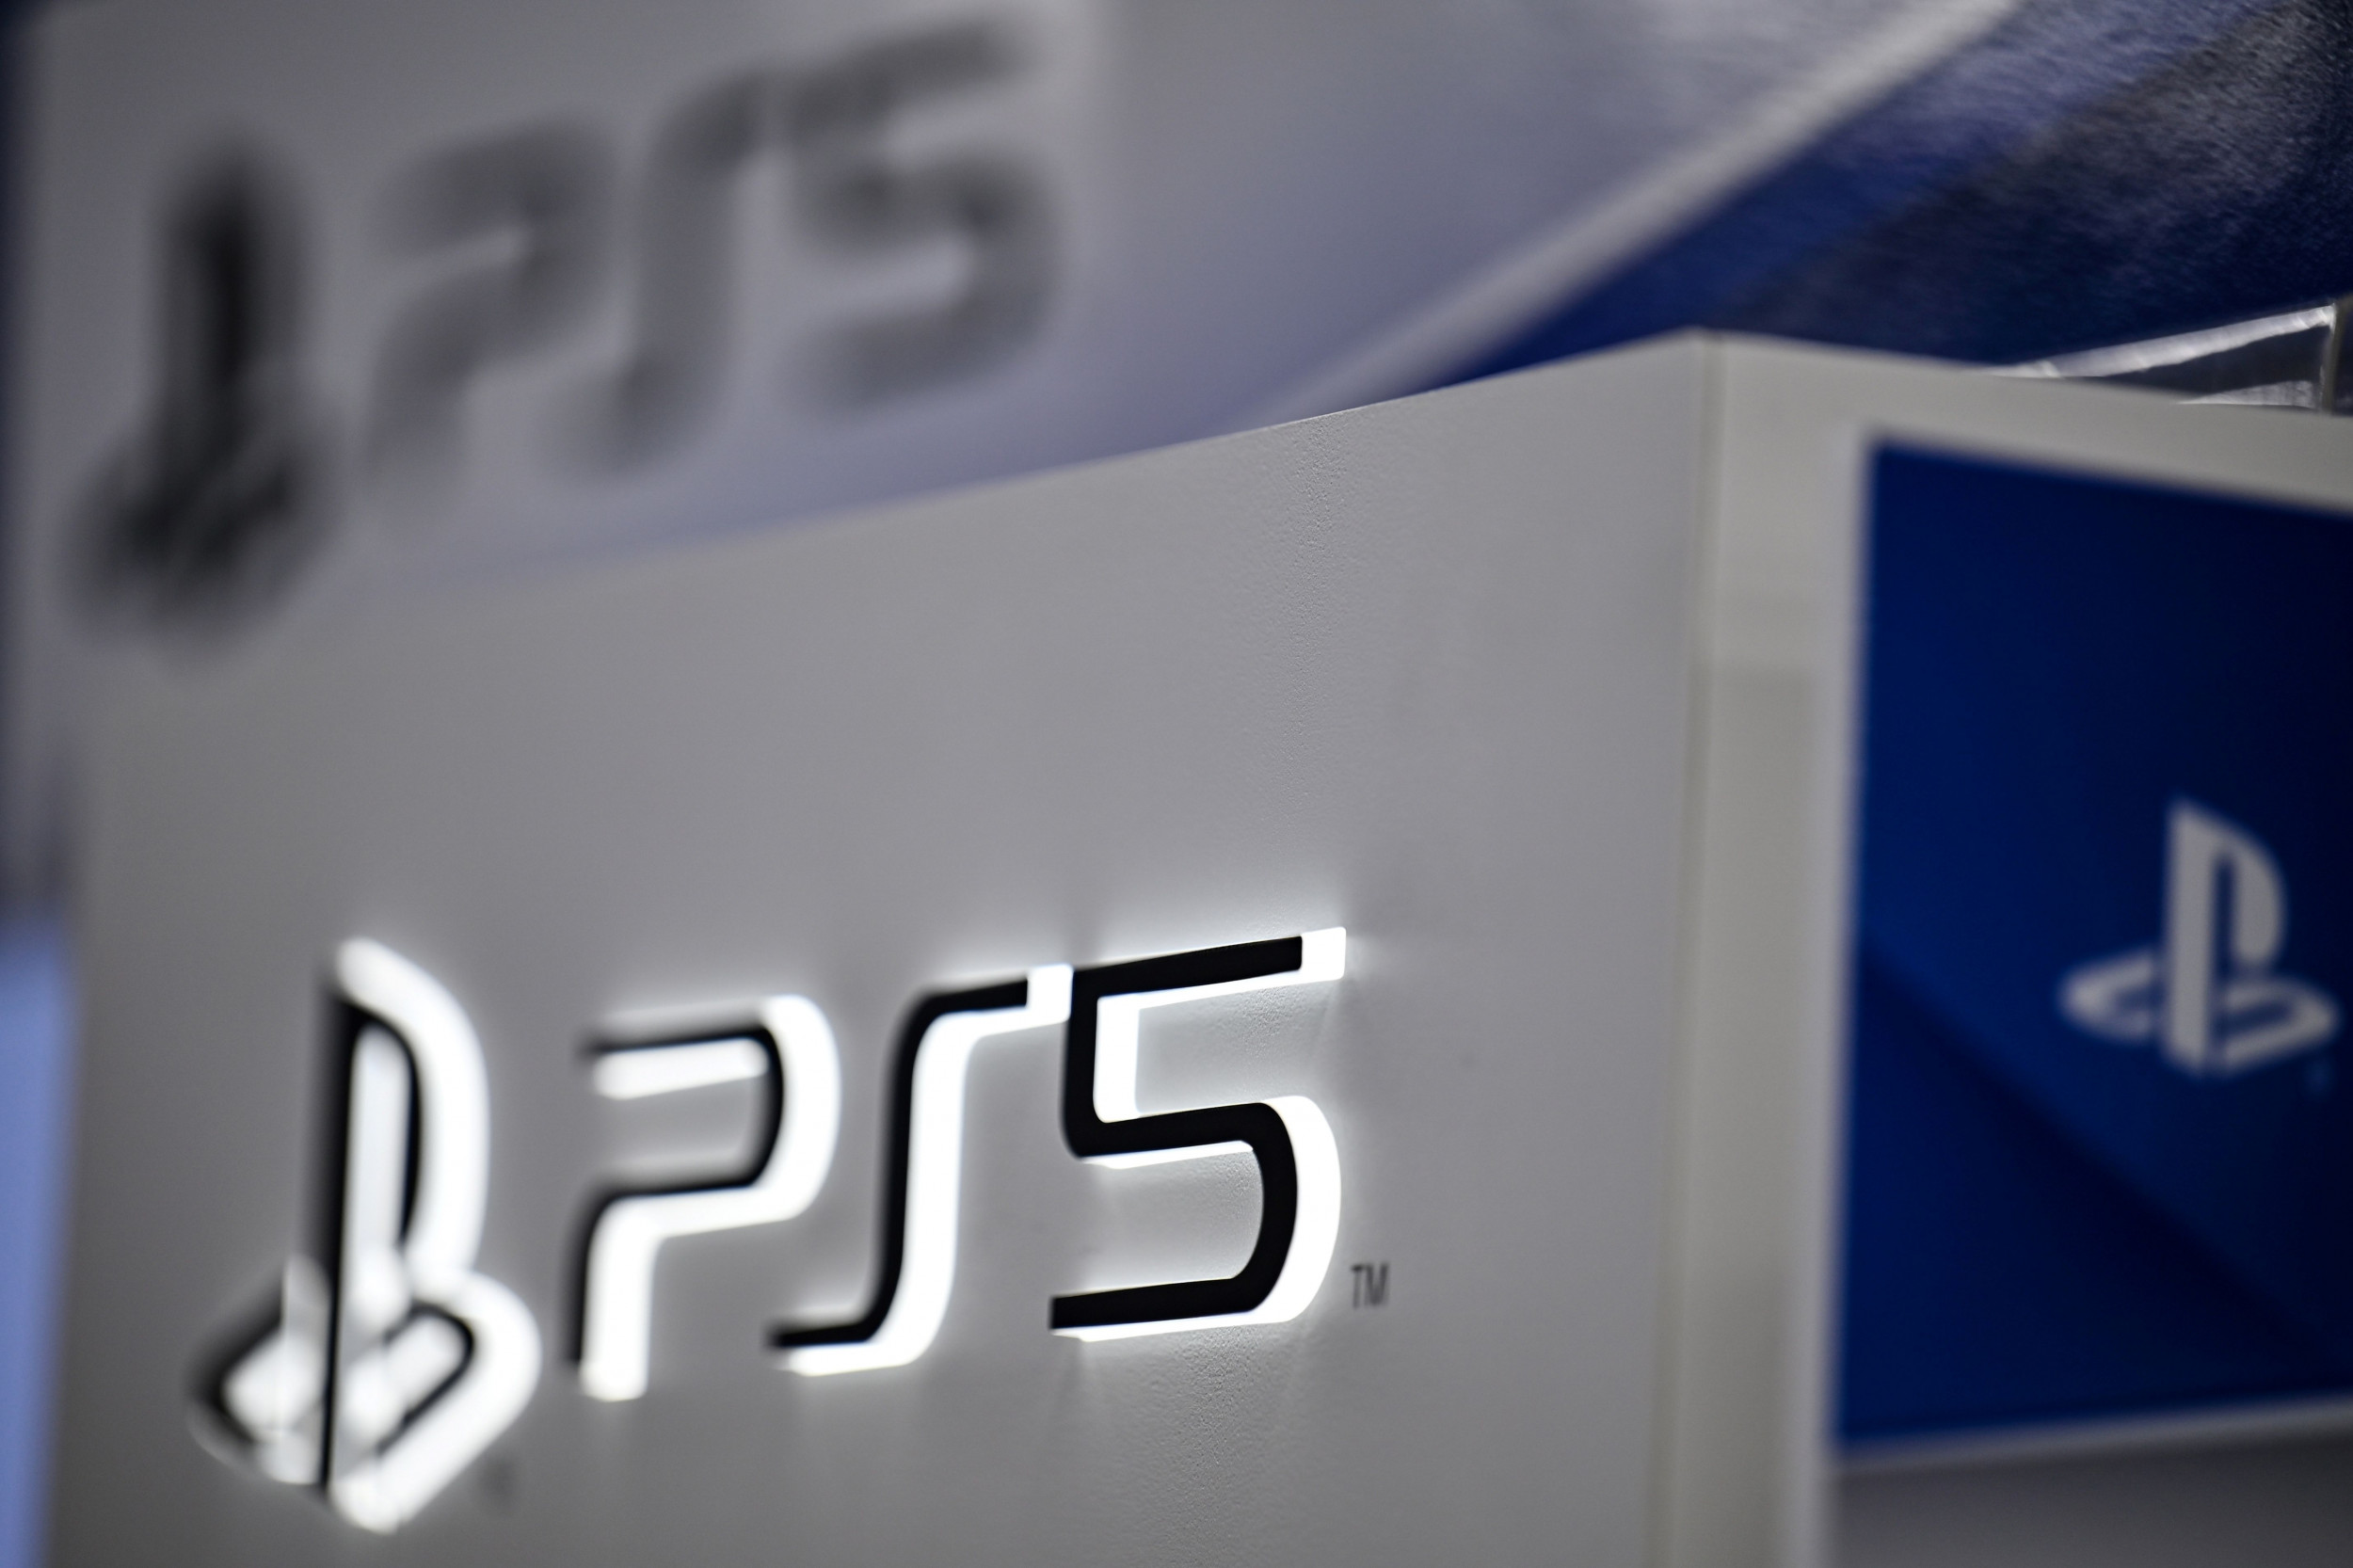 Walmart PS5 Restock Leaves Gamers Angry as Sony Console Sells Out During Black Friday Sales - Newsweek